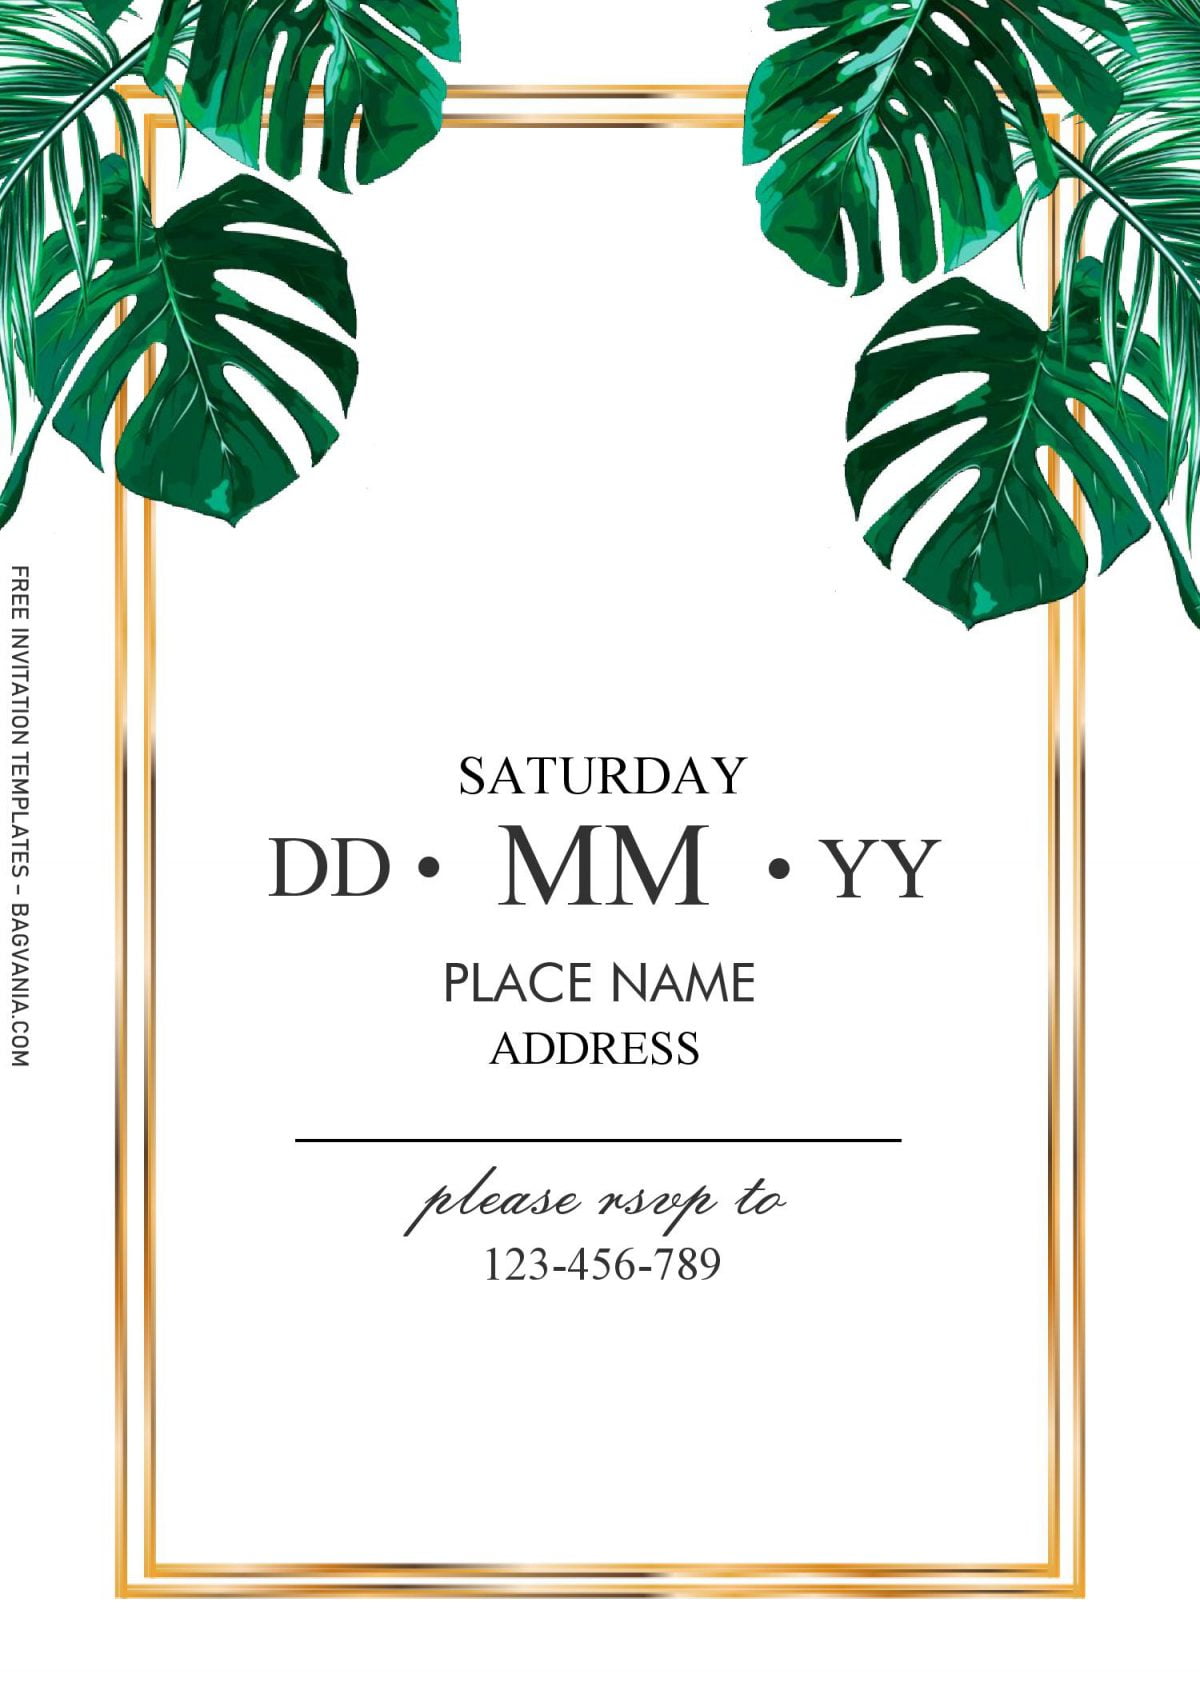 Tropical Leaves Invitation Templates - Editable With MS Word and has gold text frame